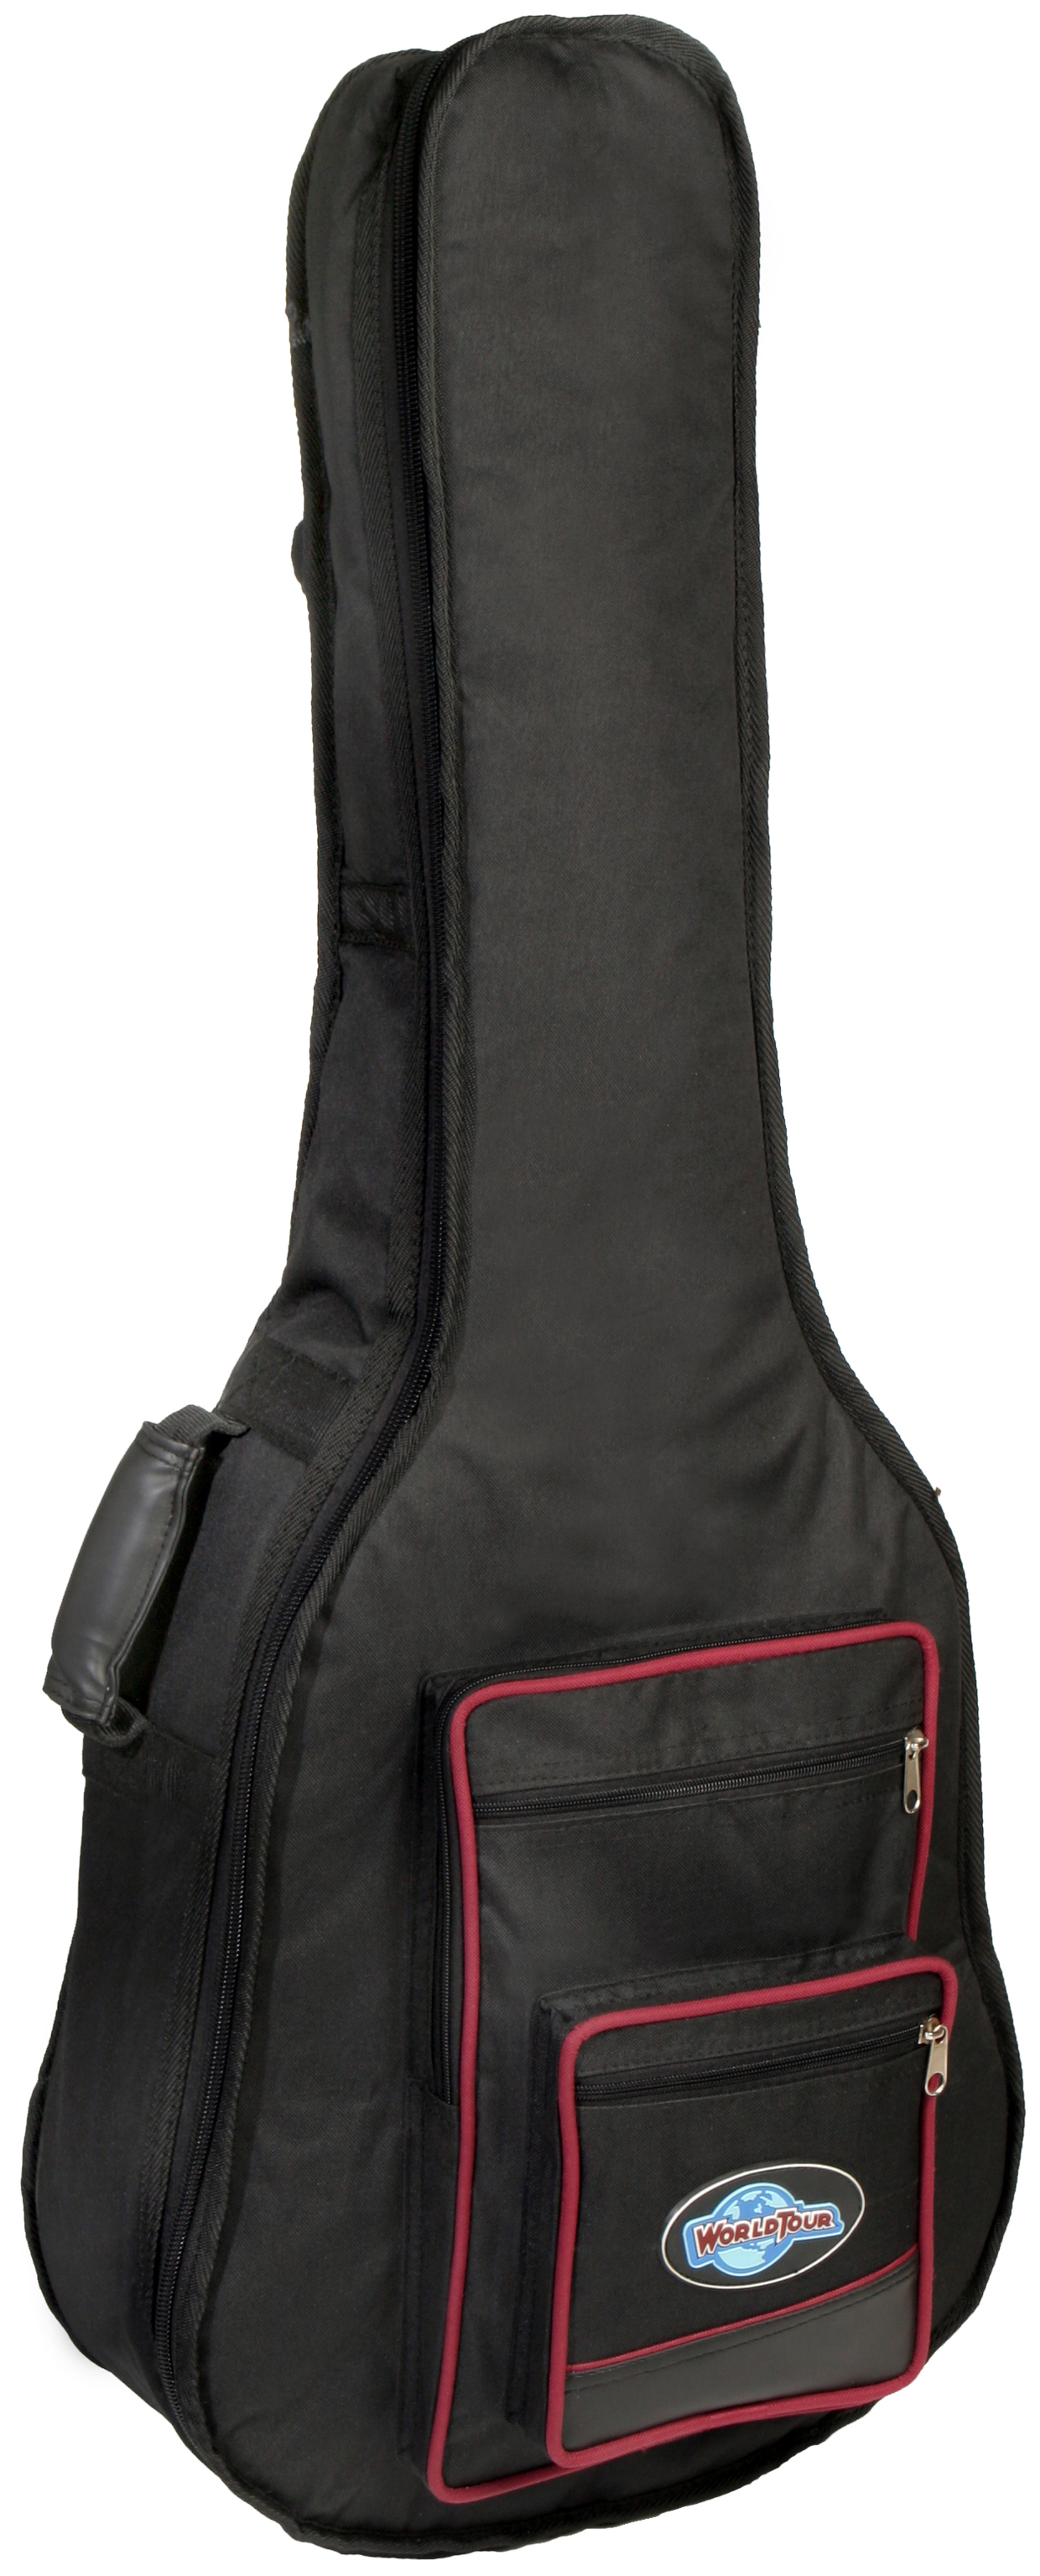 World Tour World Tour Deluxe 20mm Acoustic Guitar Gig Bag